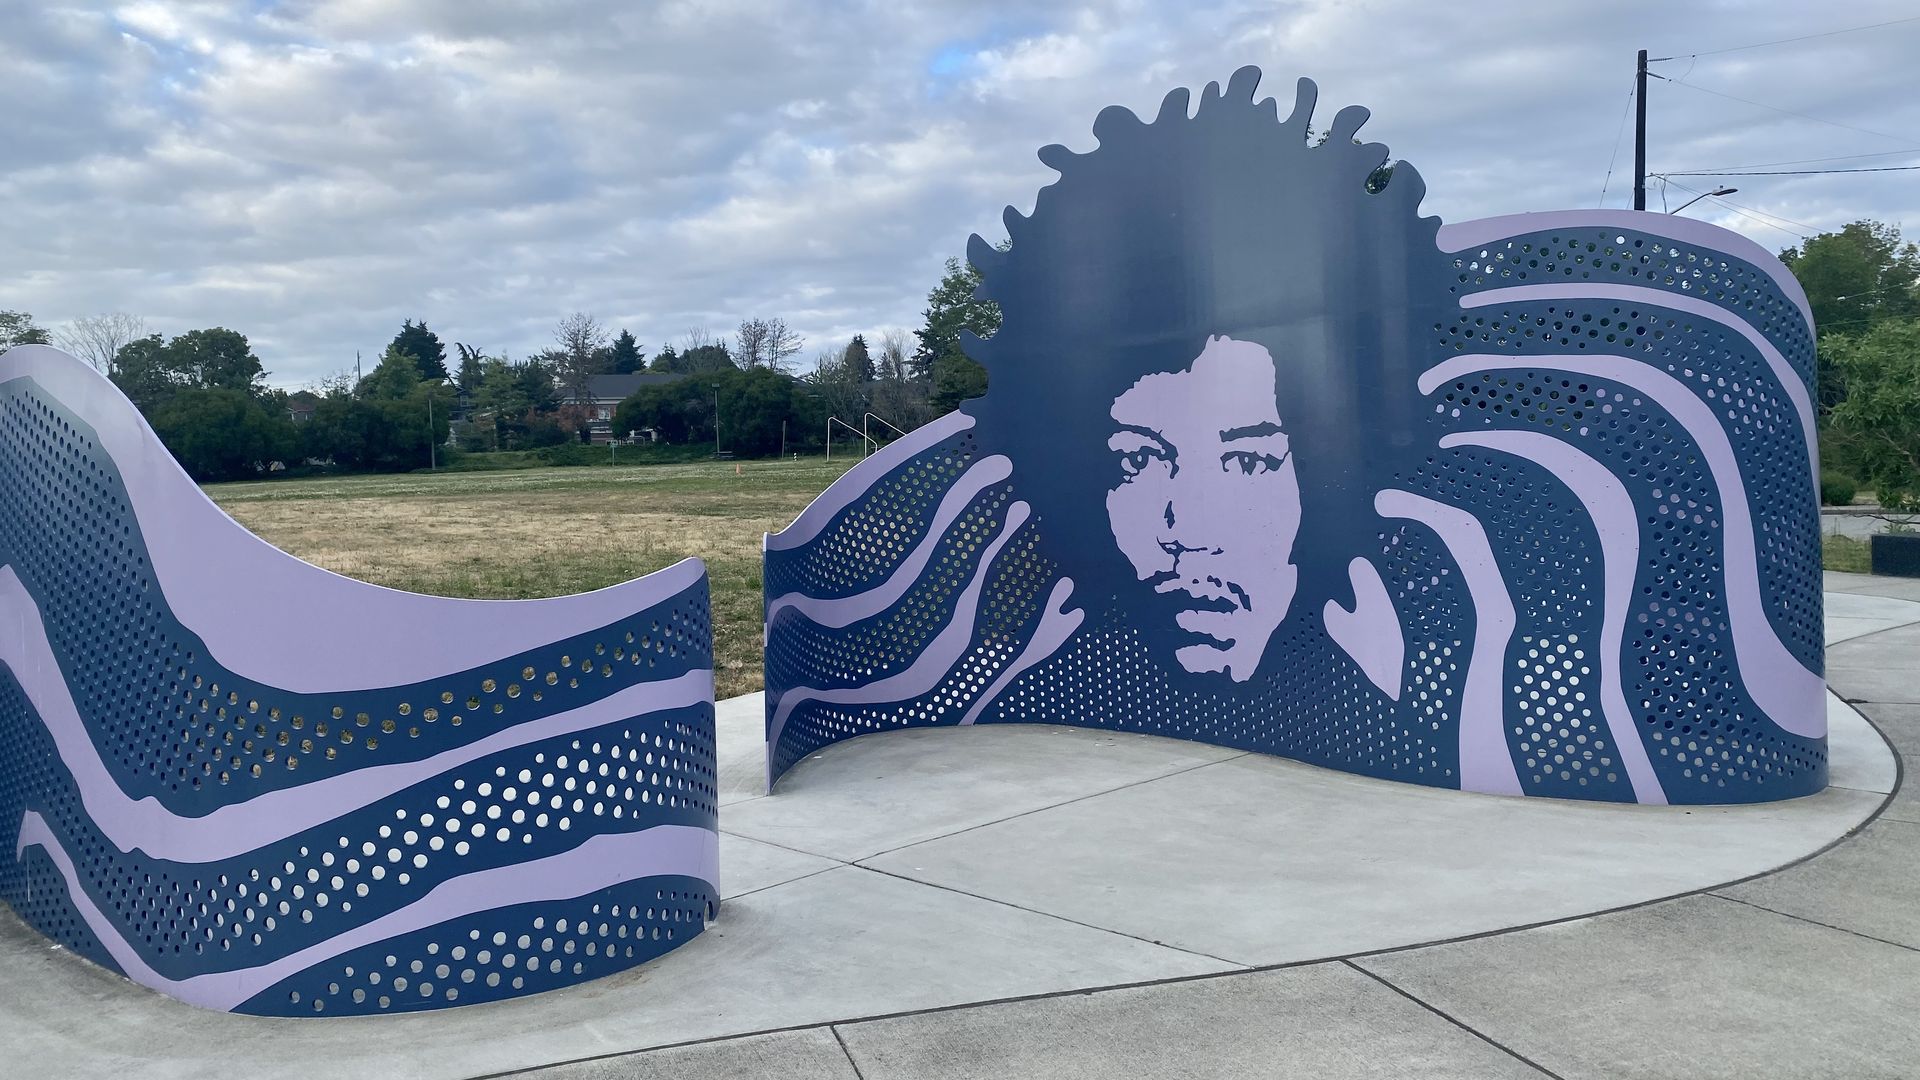 A purple metal sculpture with the face of Jimi Hendrix featured prominently, with clouds above, grass and trees in background.